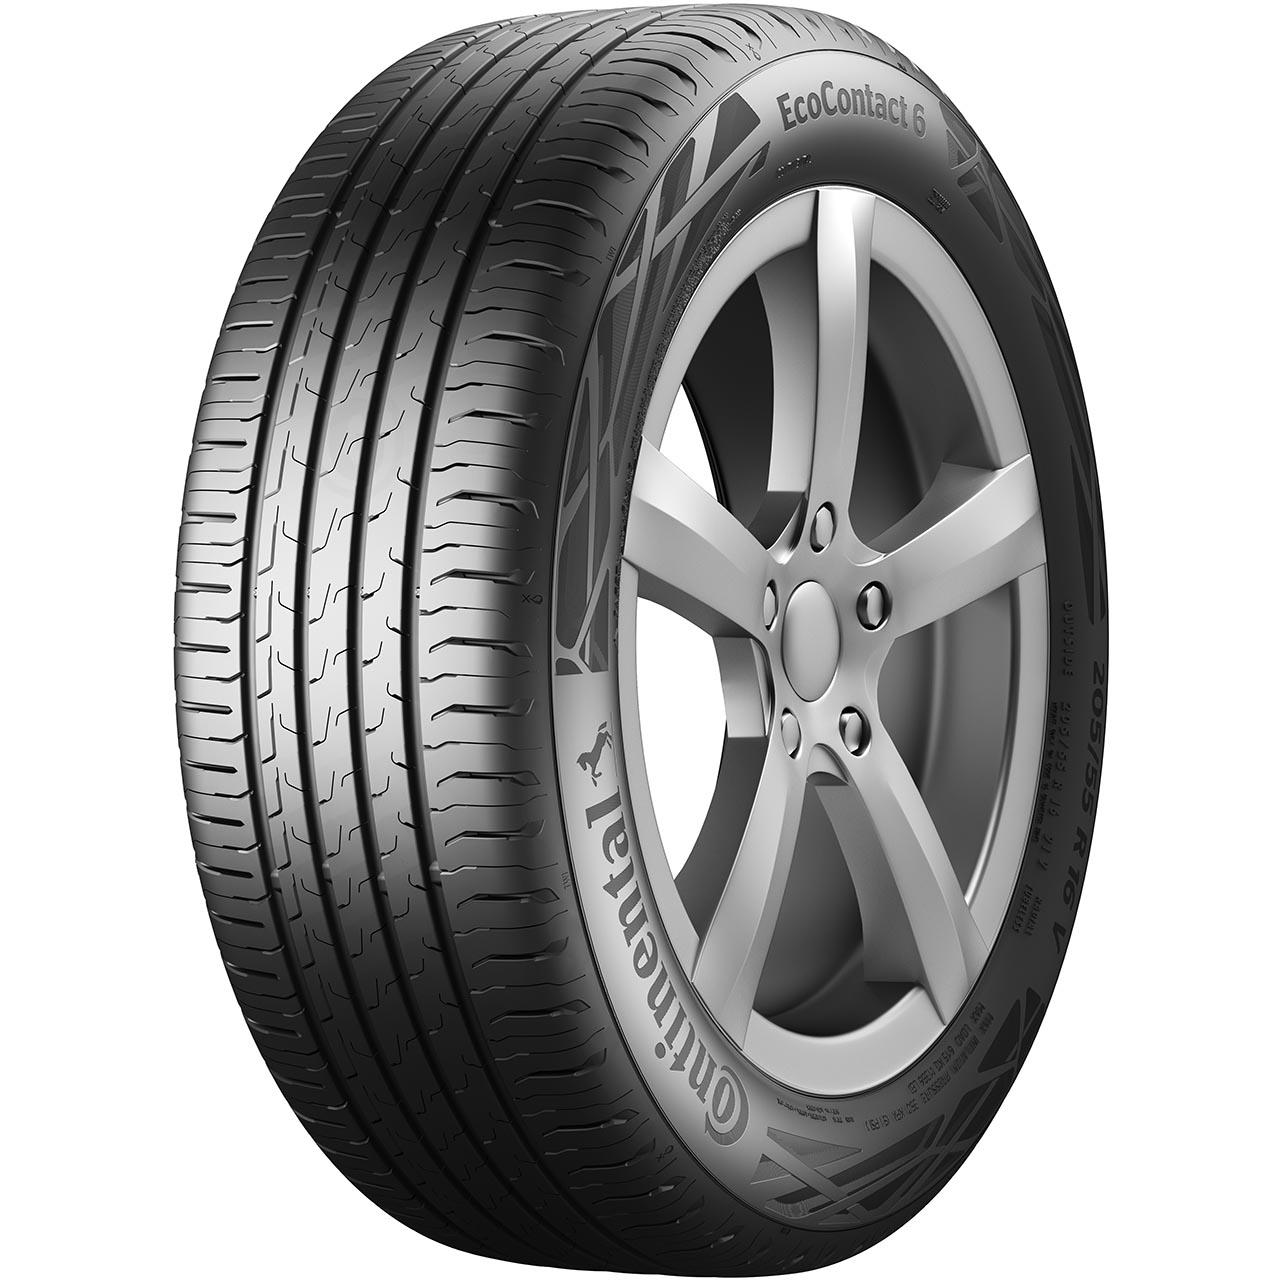 Continental ECOCONTACT 6 245/35R20 95W XL FR OPE